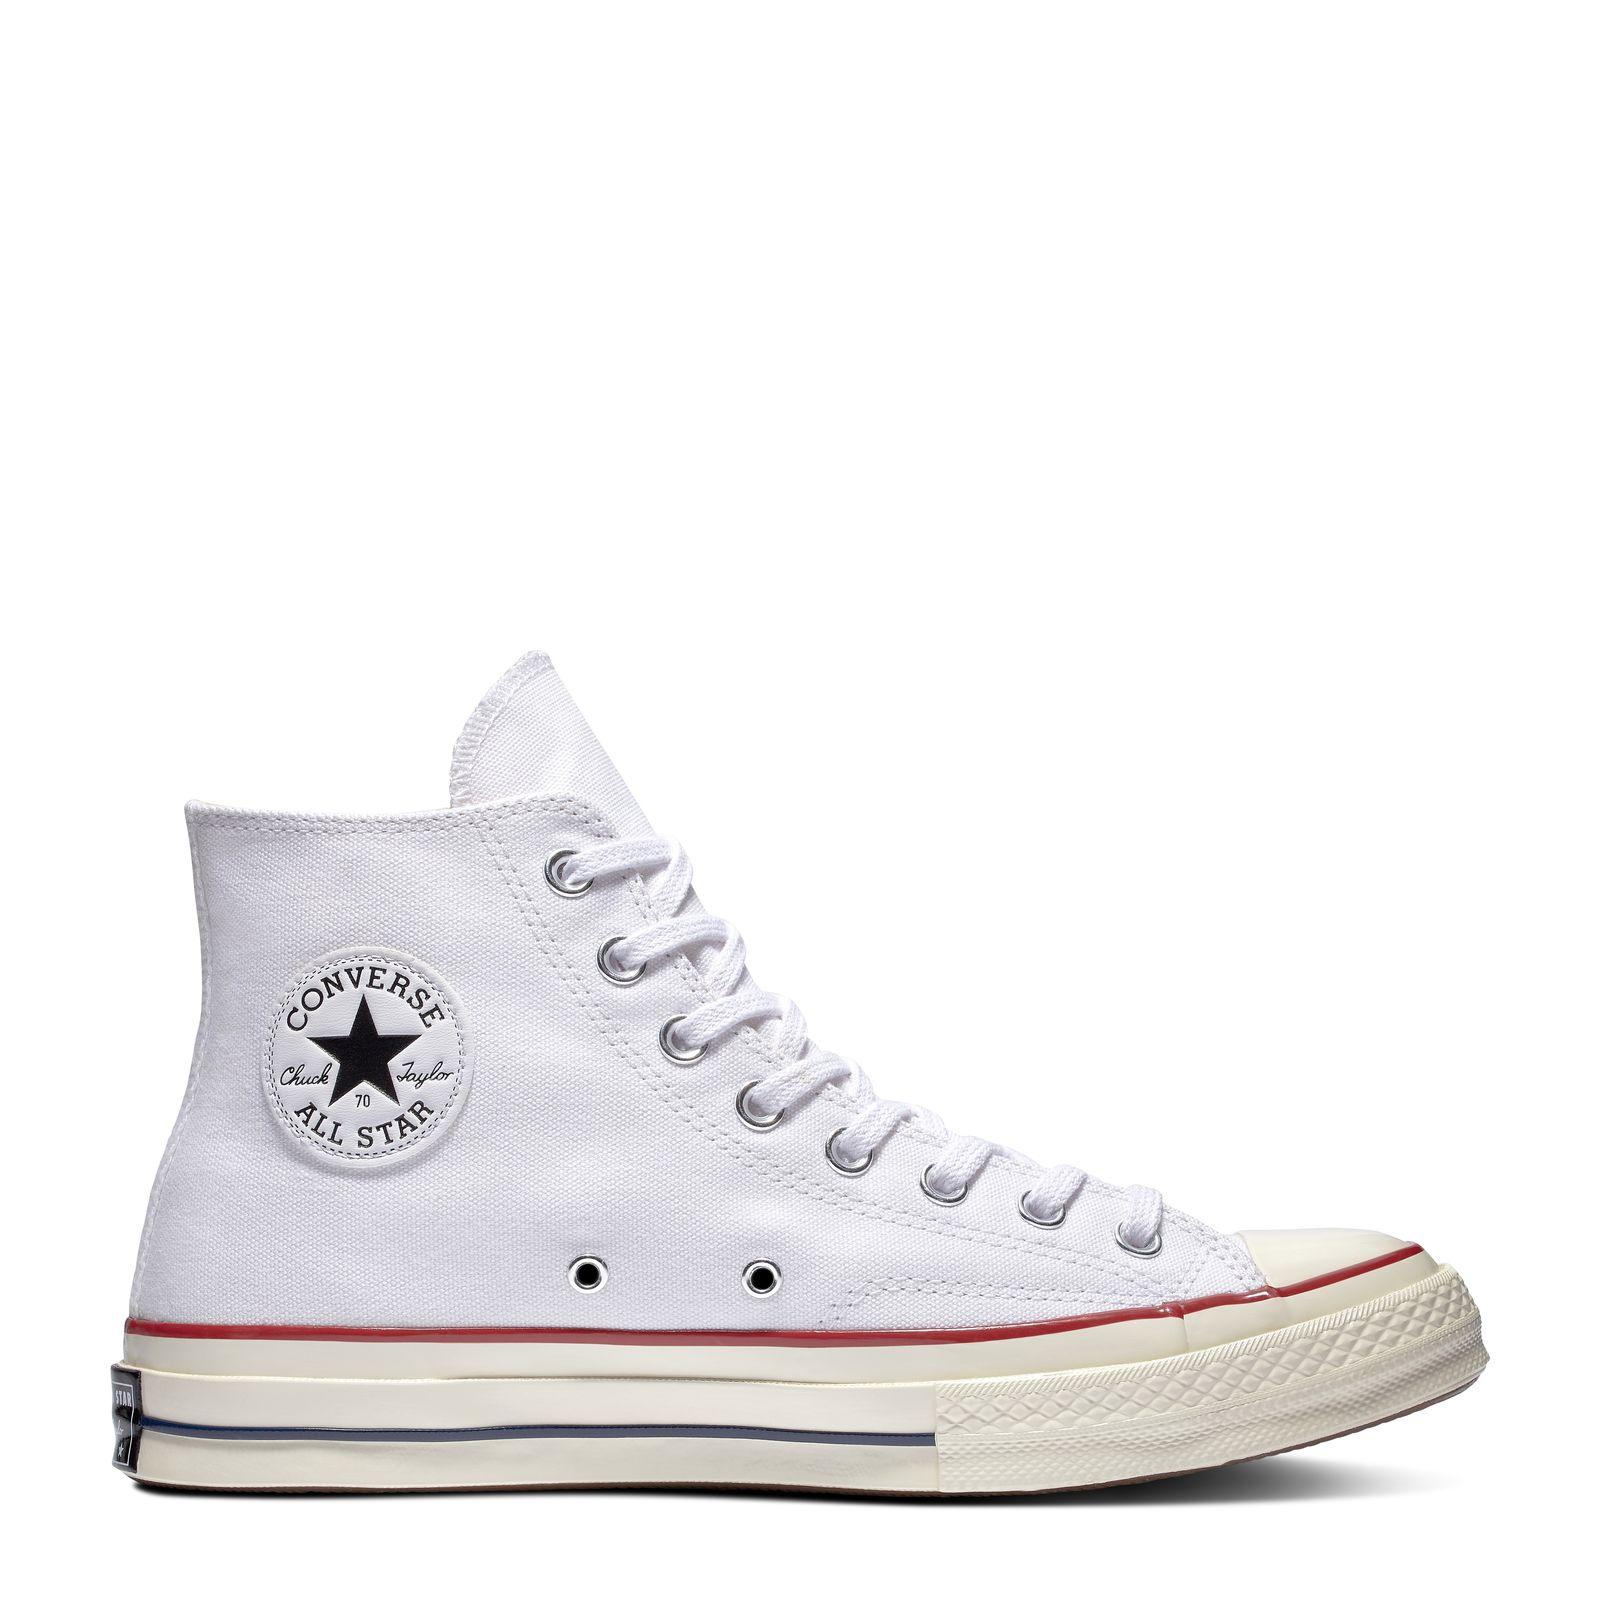 Converse - Buy Converse at Best Price in Philippines | www.lazada.com.ph